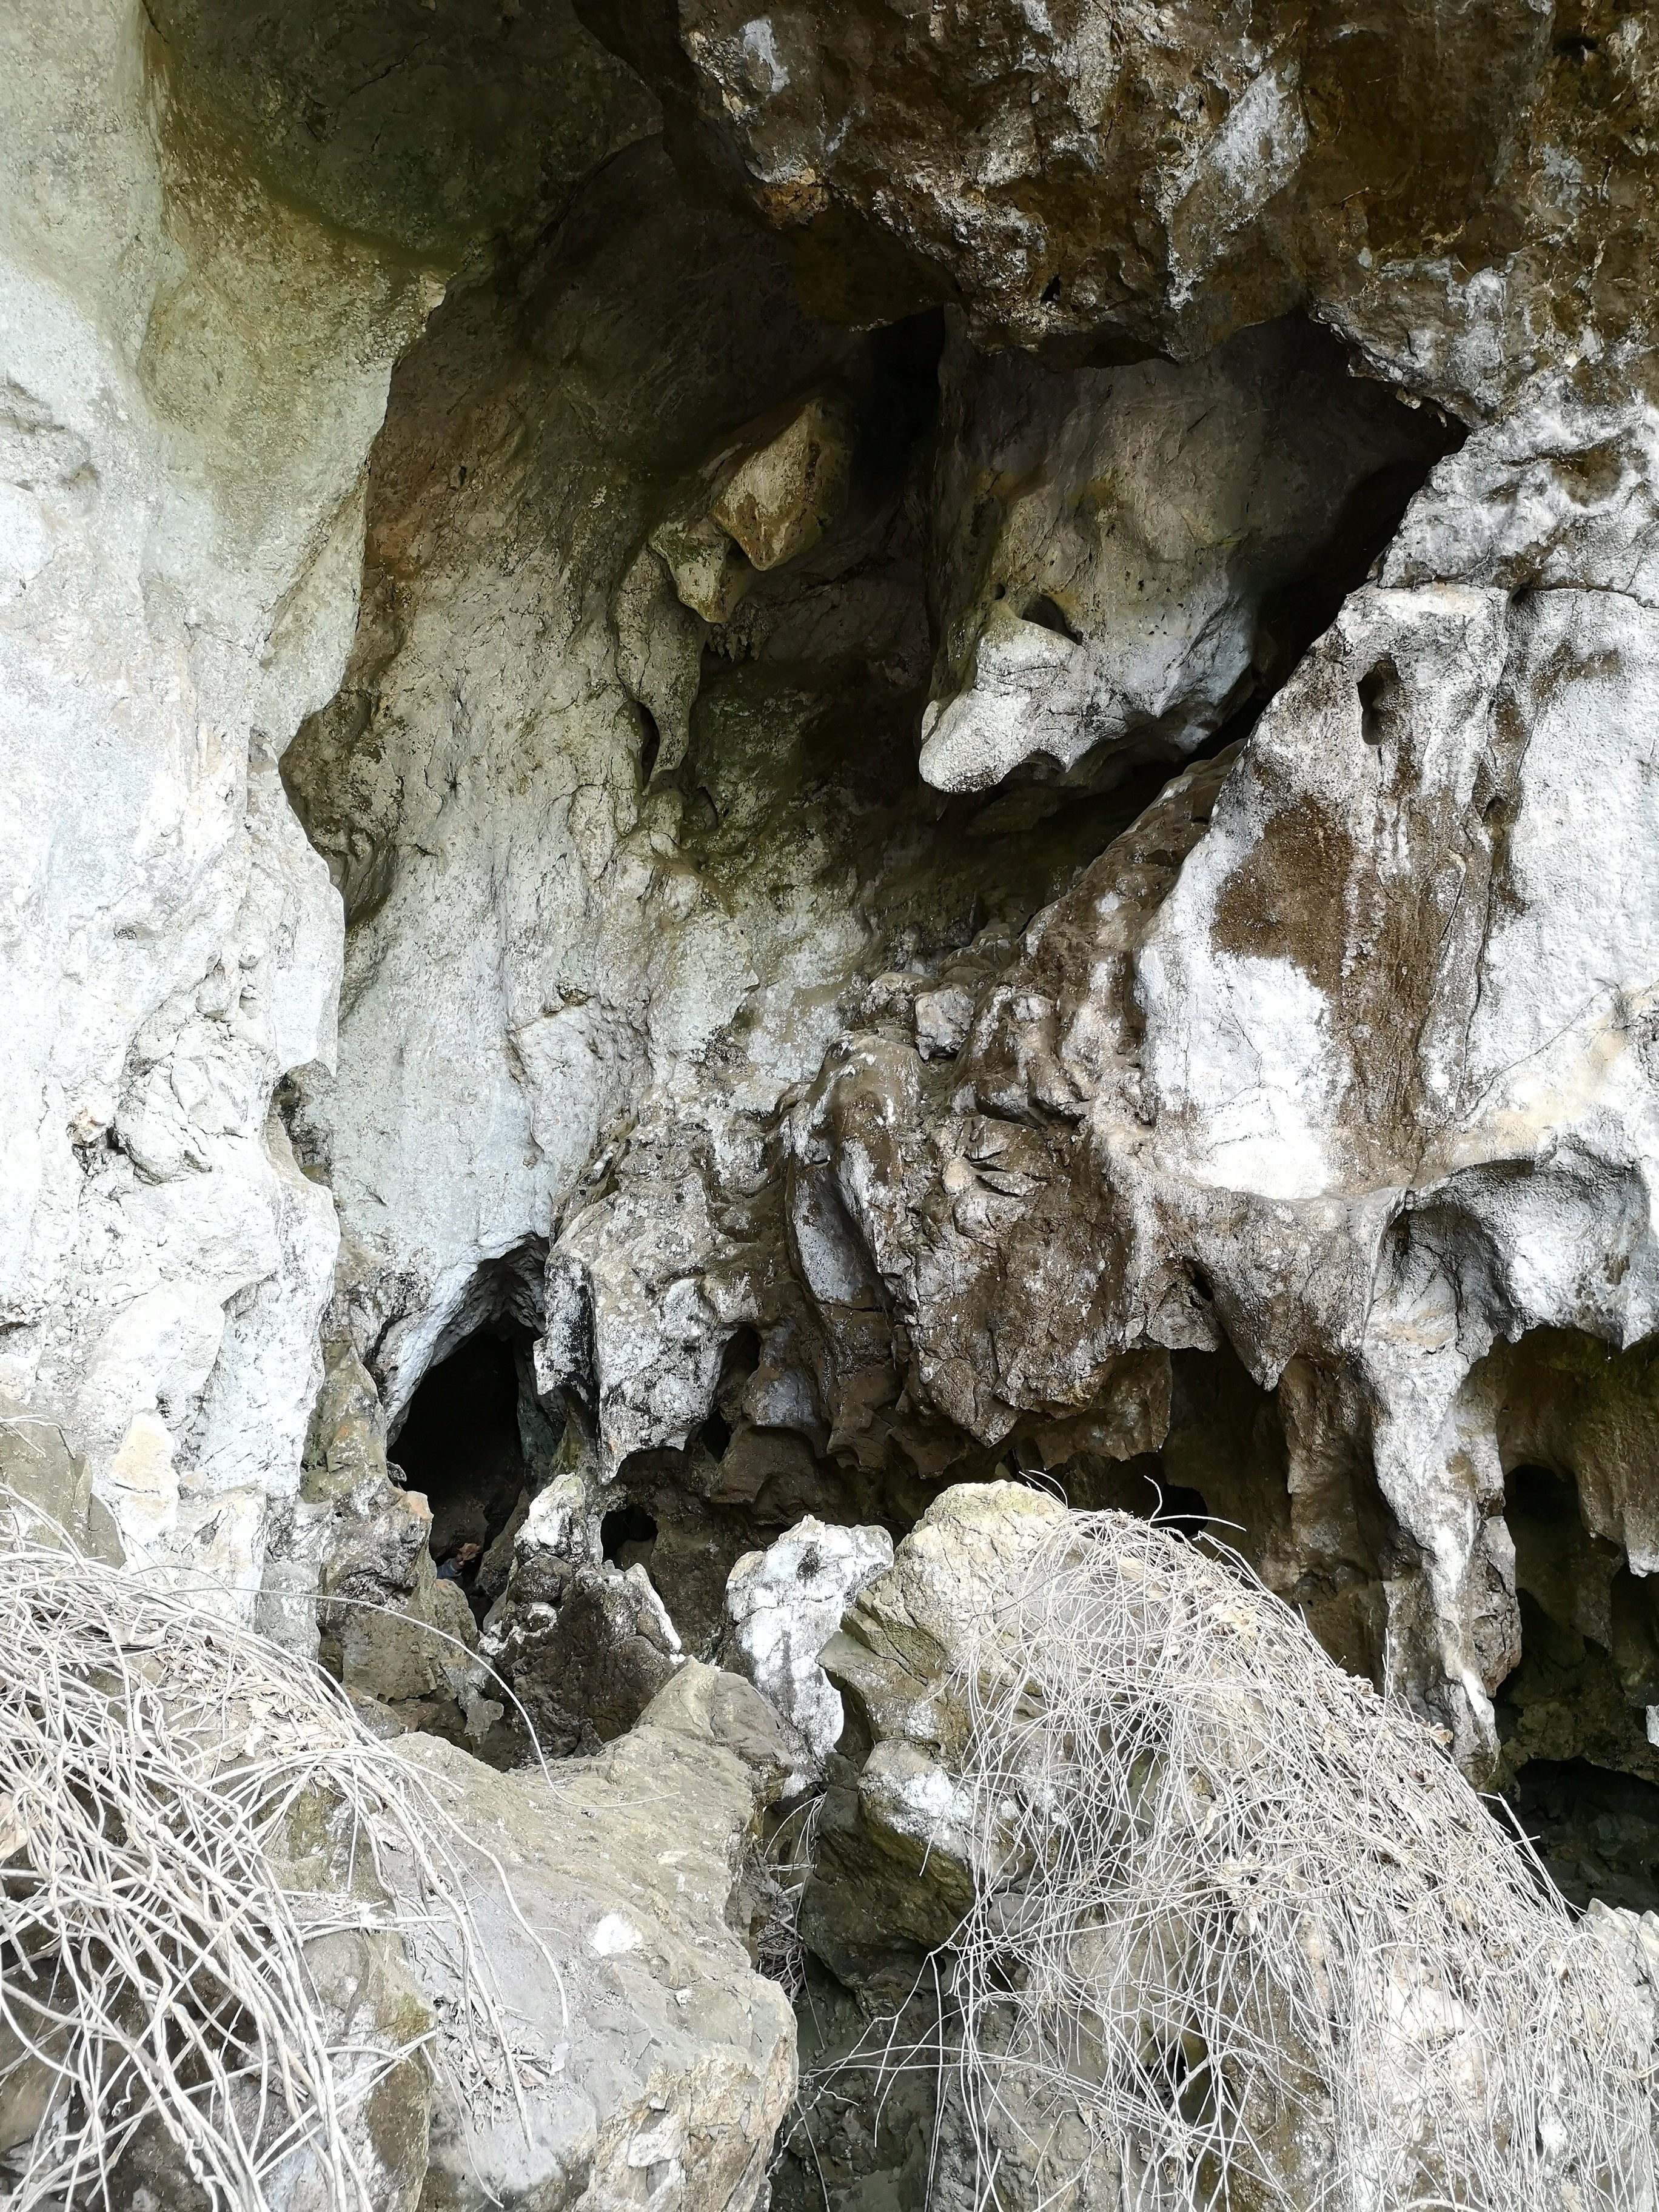 The entrance to Tam Ngu Hao 2 cave, also known as Cobra Cave. (Photo: F. Demeter et al., 2022)